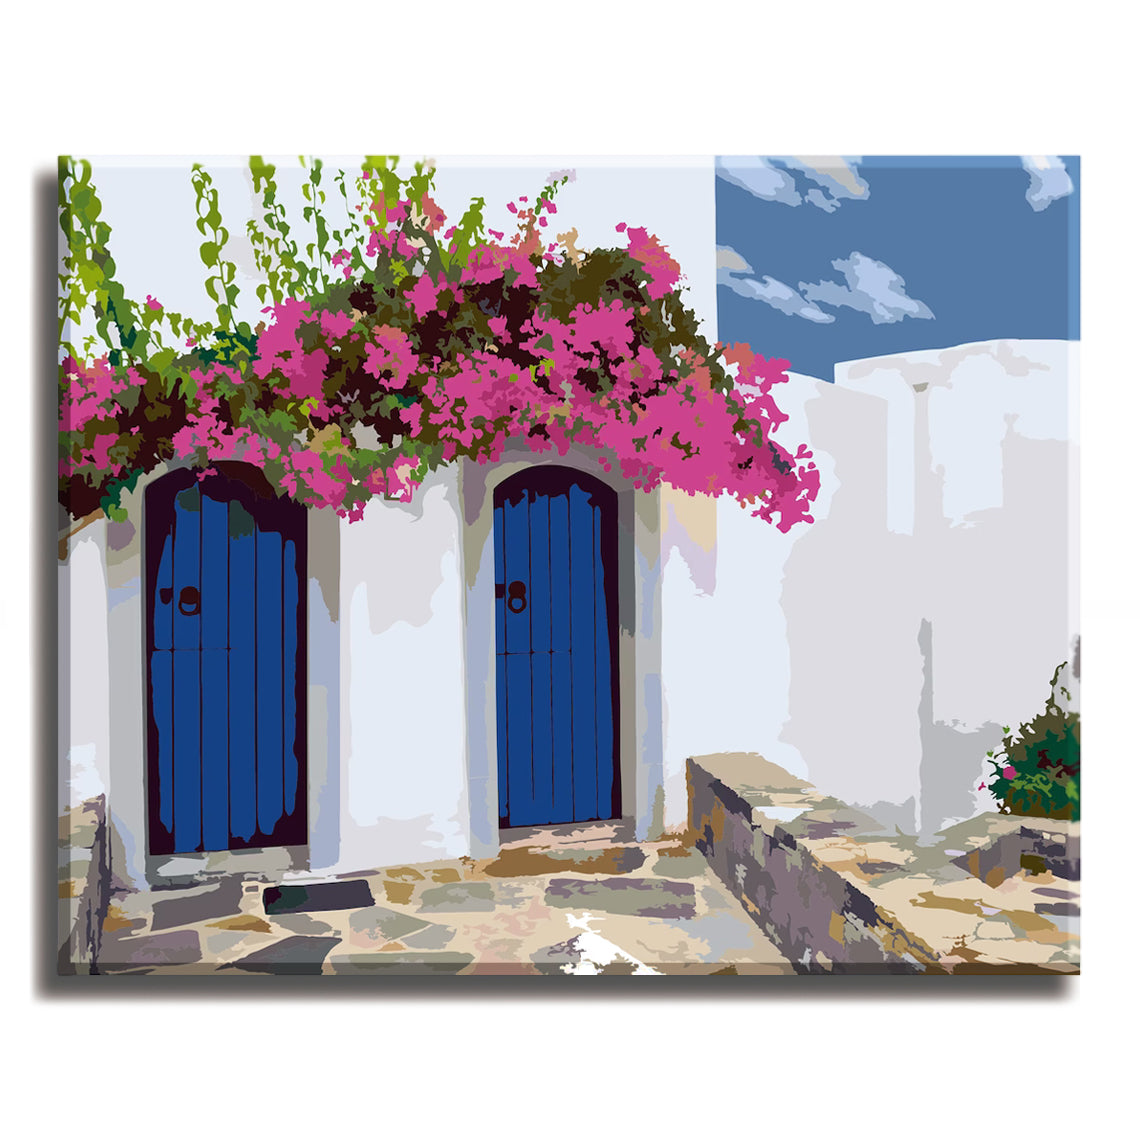 Greek House - Paint by Number Kit DIY Oil Painting on Wood Stretched Canvas 16x20 inches